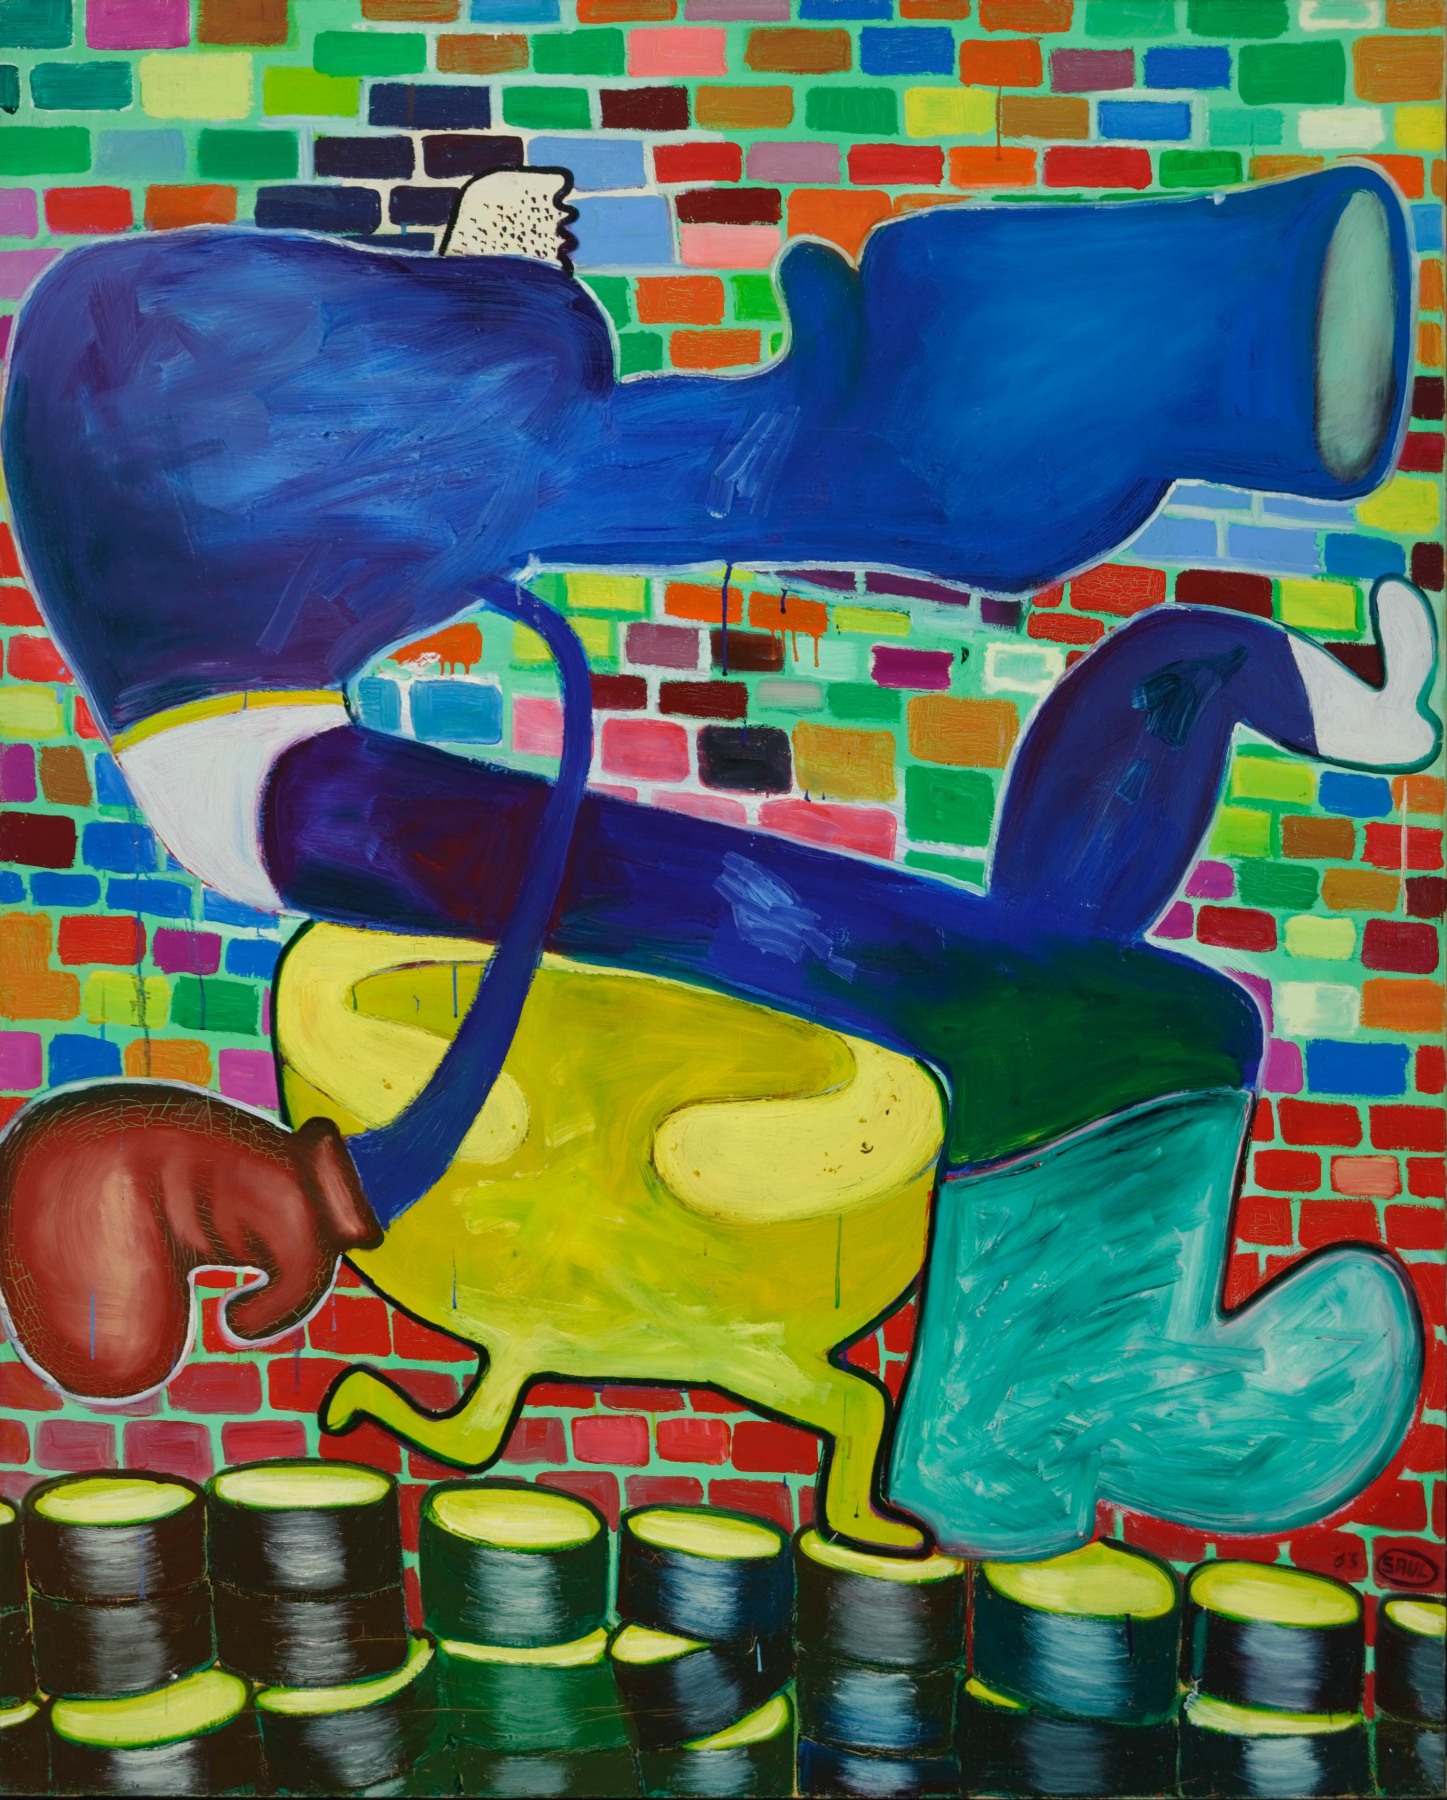 “Peter Saul, Murder in the Kitchen, Early Works” -  - Viewing Room - Michael Werner Gallery, New York and London